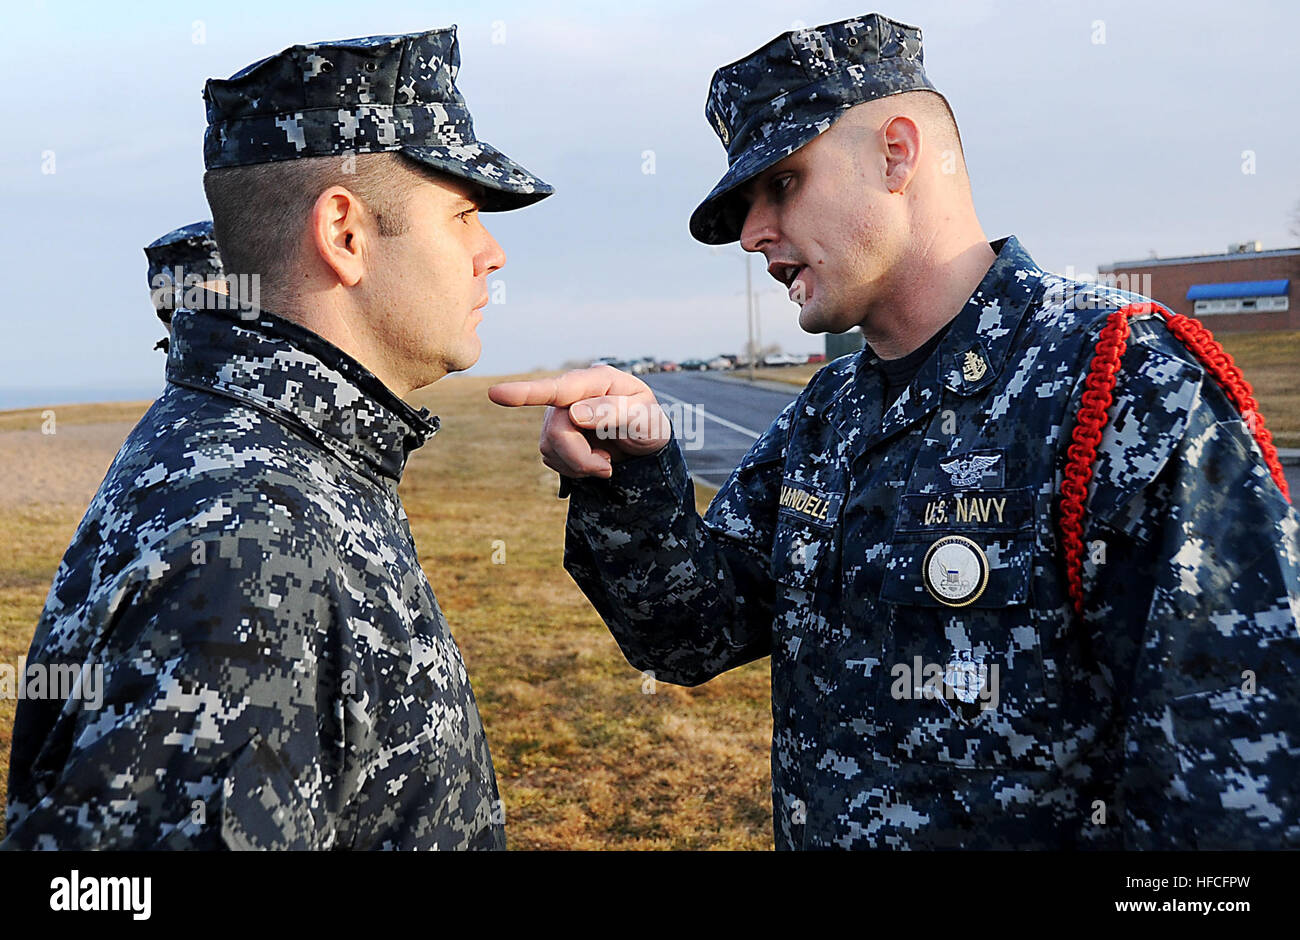 Senior Chief Aviation Machinist's Mate Robert Demanuele, a recruit division commander at Officer Training Command, instructs a Navy officer candidate from Officer Candidate School on proper grooming standards during morning quarters at Naval Station Newport. Navy chiefs mold officers at Officer Training Command 120223-N-CD297-142 Stock Photo